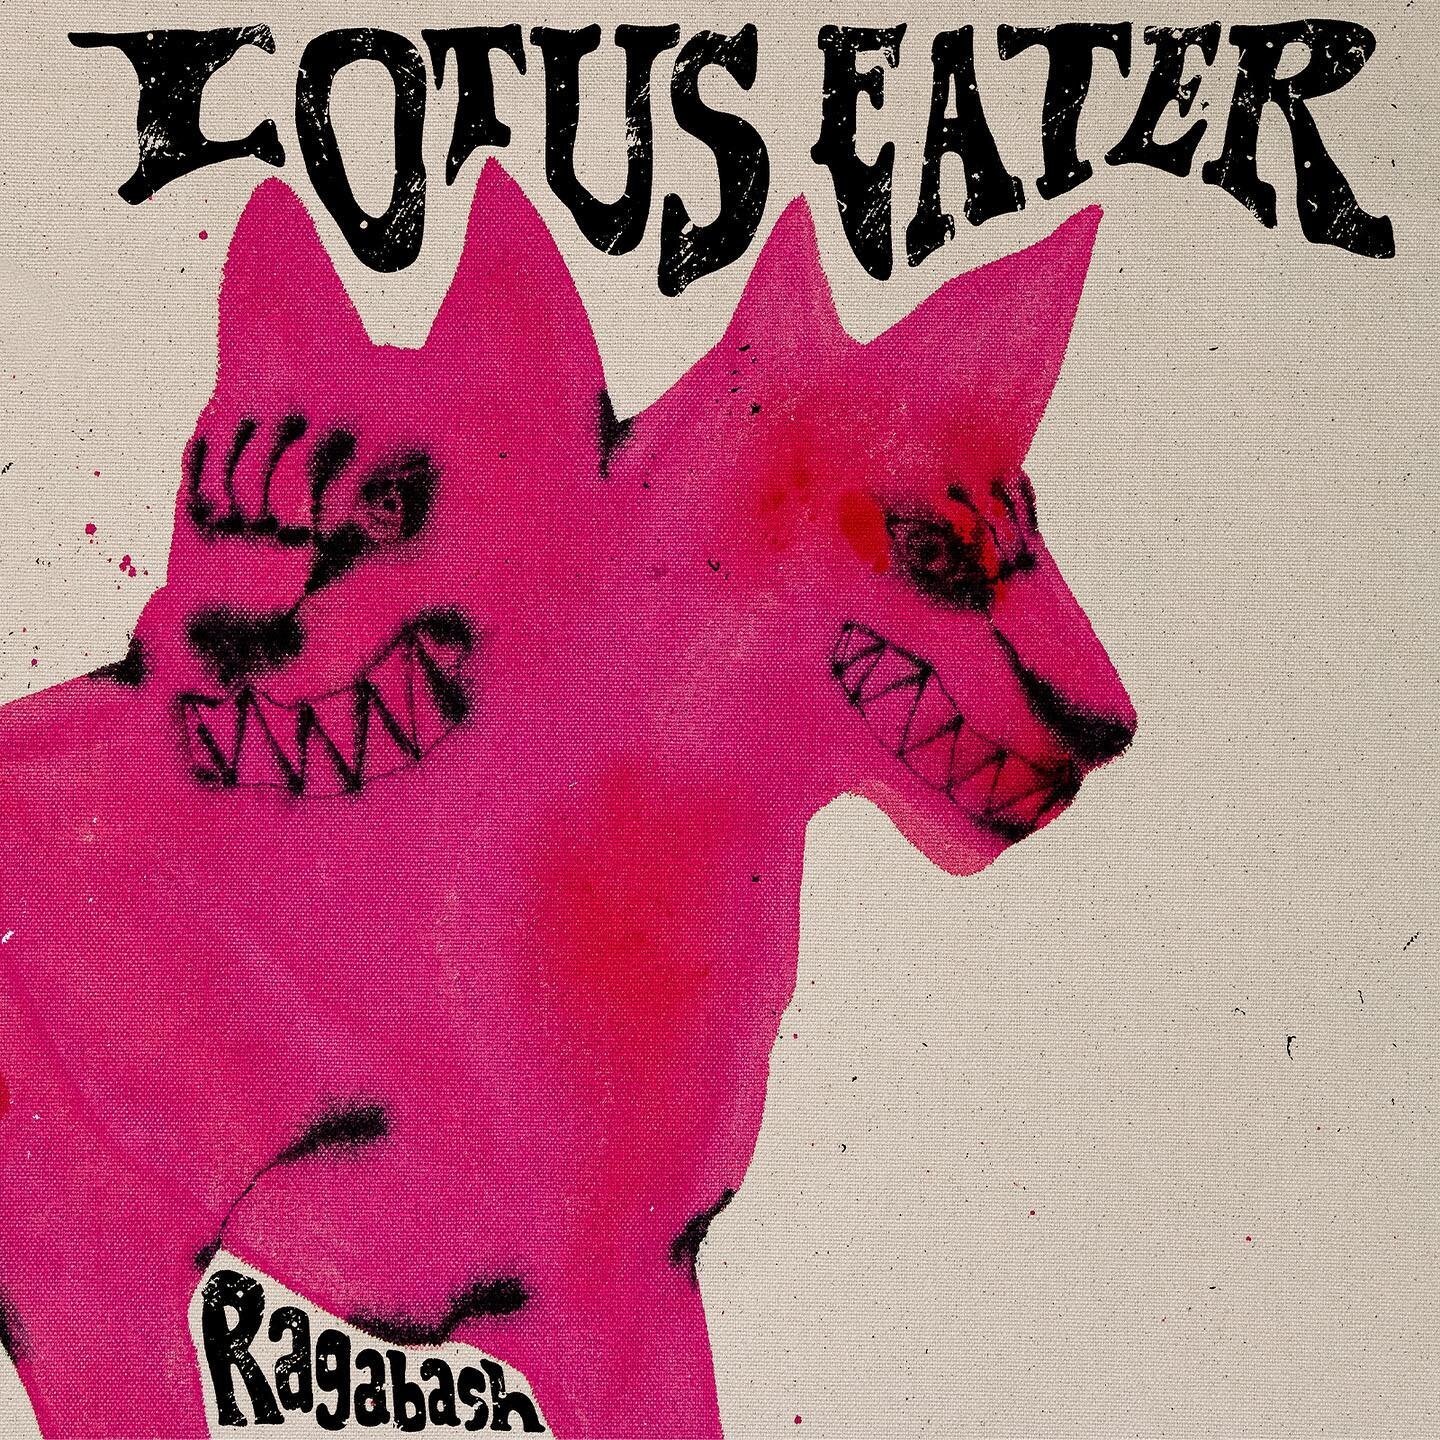 HOPE Y&rsquo;ALL CAME HUNGRY BC LOTUS EATER IS HERE 🪷🍽️👄

Gonna save all the heartfelt shit for tonight but HOLY FUCK we are so excited and so grateful to finally share this with y&rsquo;all 😭 we&rsquo;ll see y&rsquo;all at OUR DEBUT ALBUM ragare